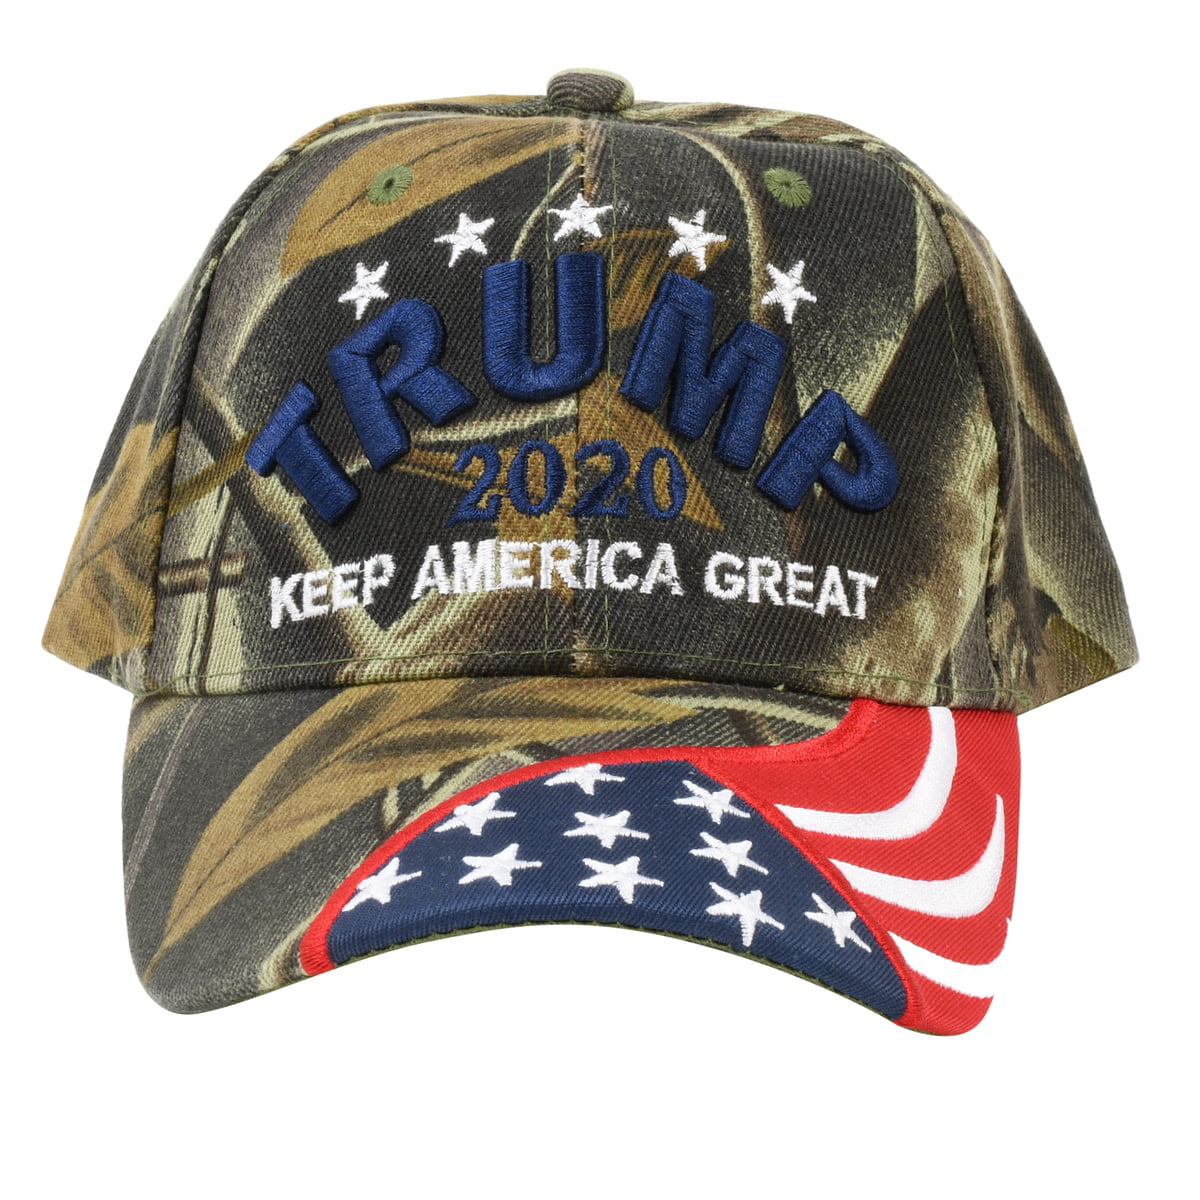 Donald Trump 2020 Cap USA Flag Camouflage Baseball Cap Embroidered Hat Black TO 